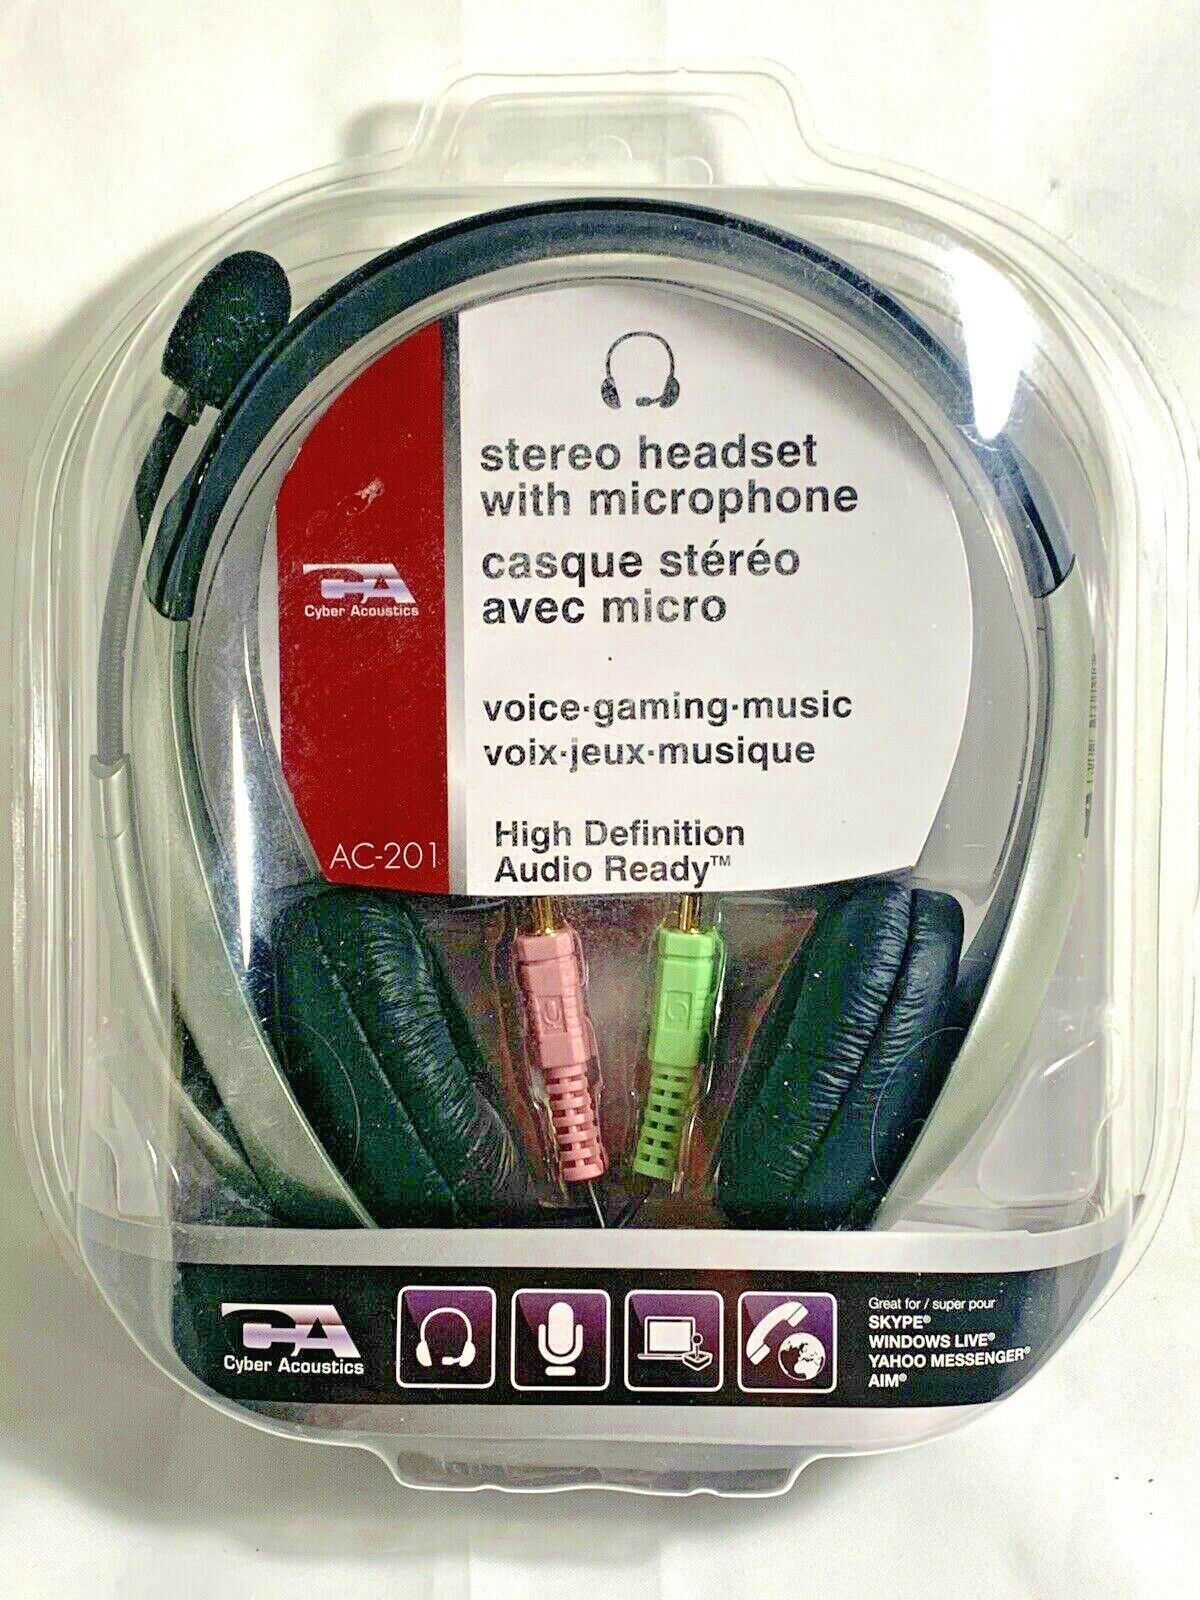 Cyber Acoustics Stereo Headset with Microphone Headphones Audio AC-201